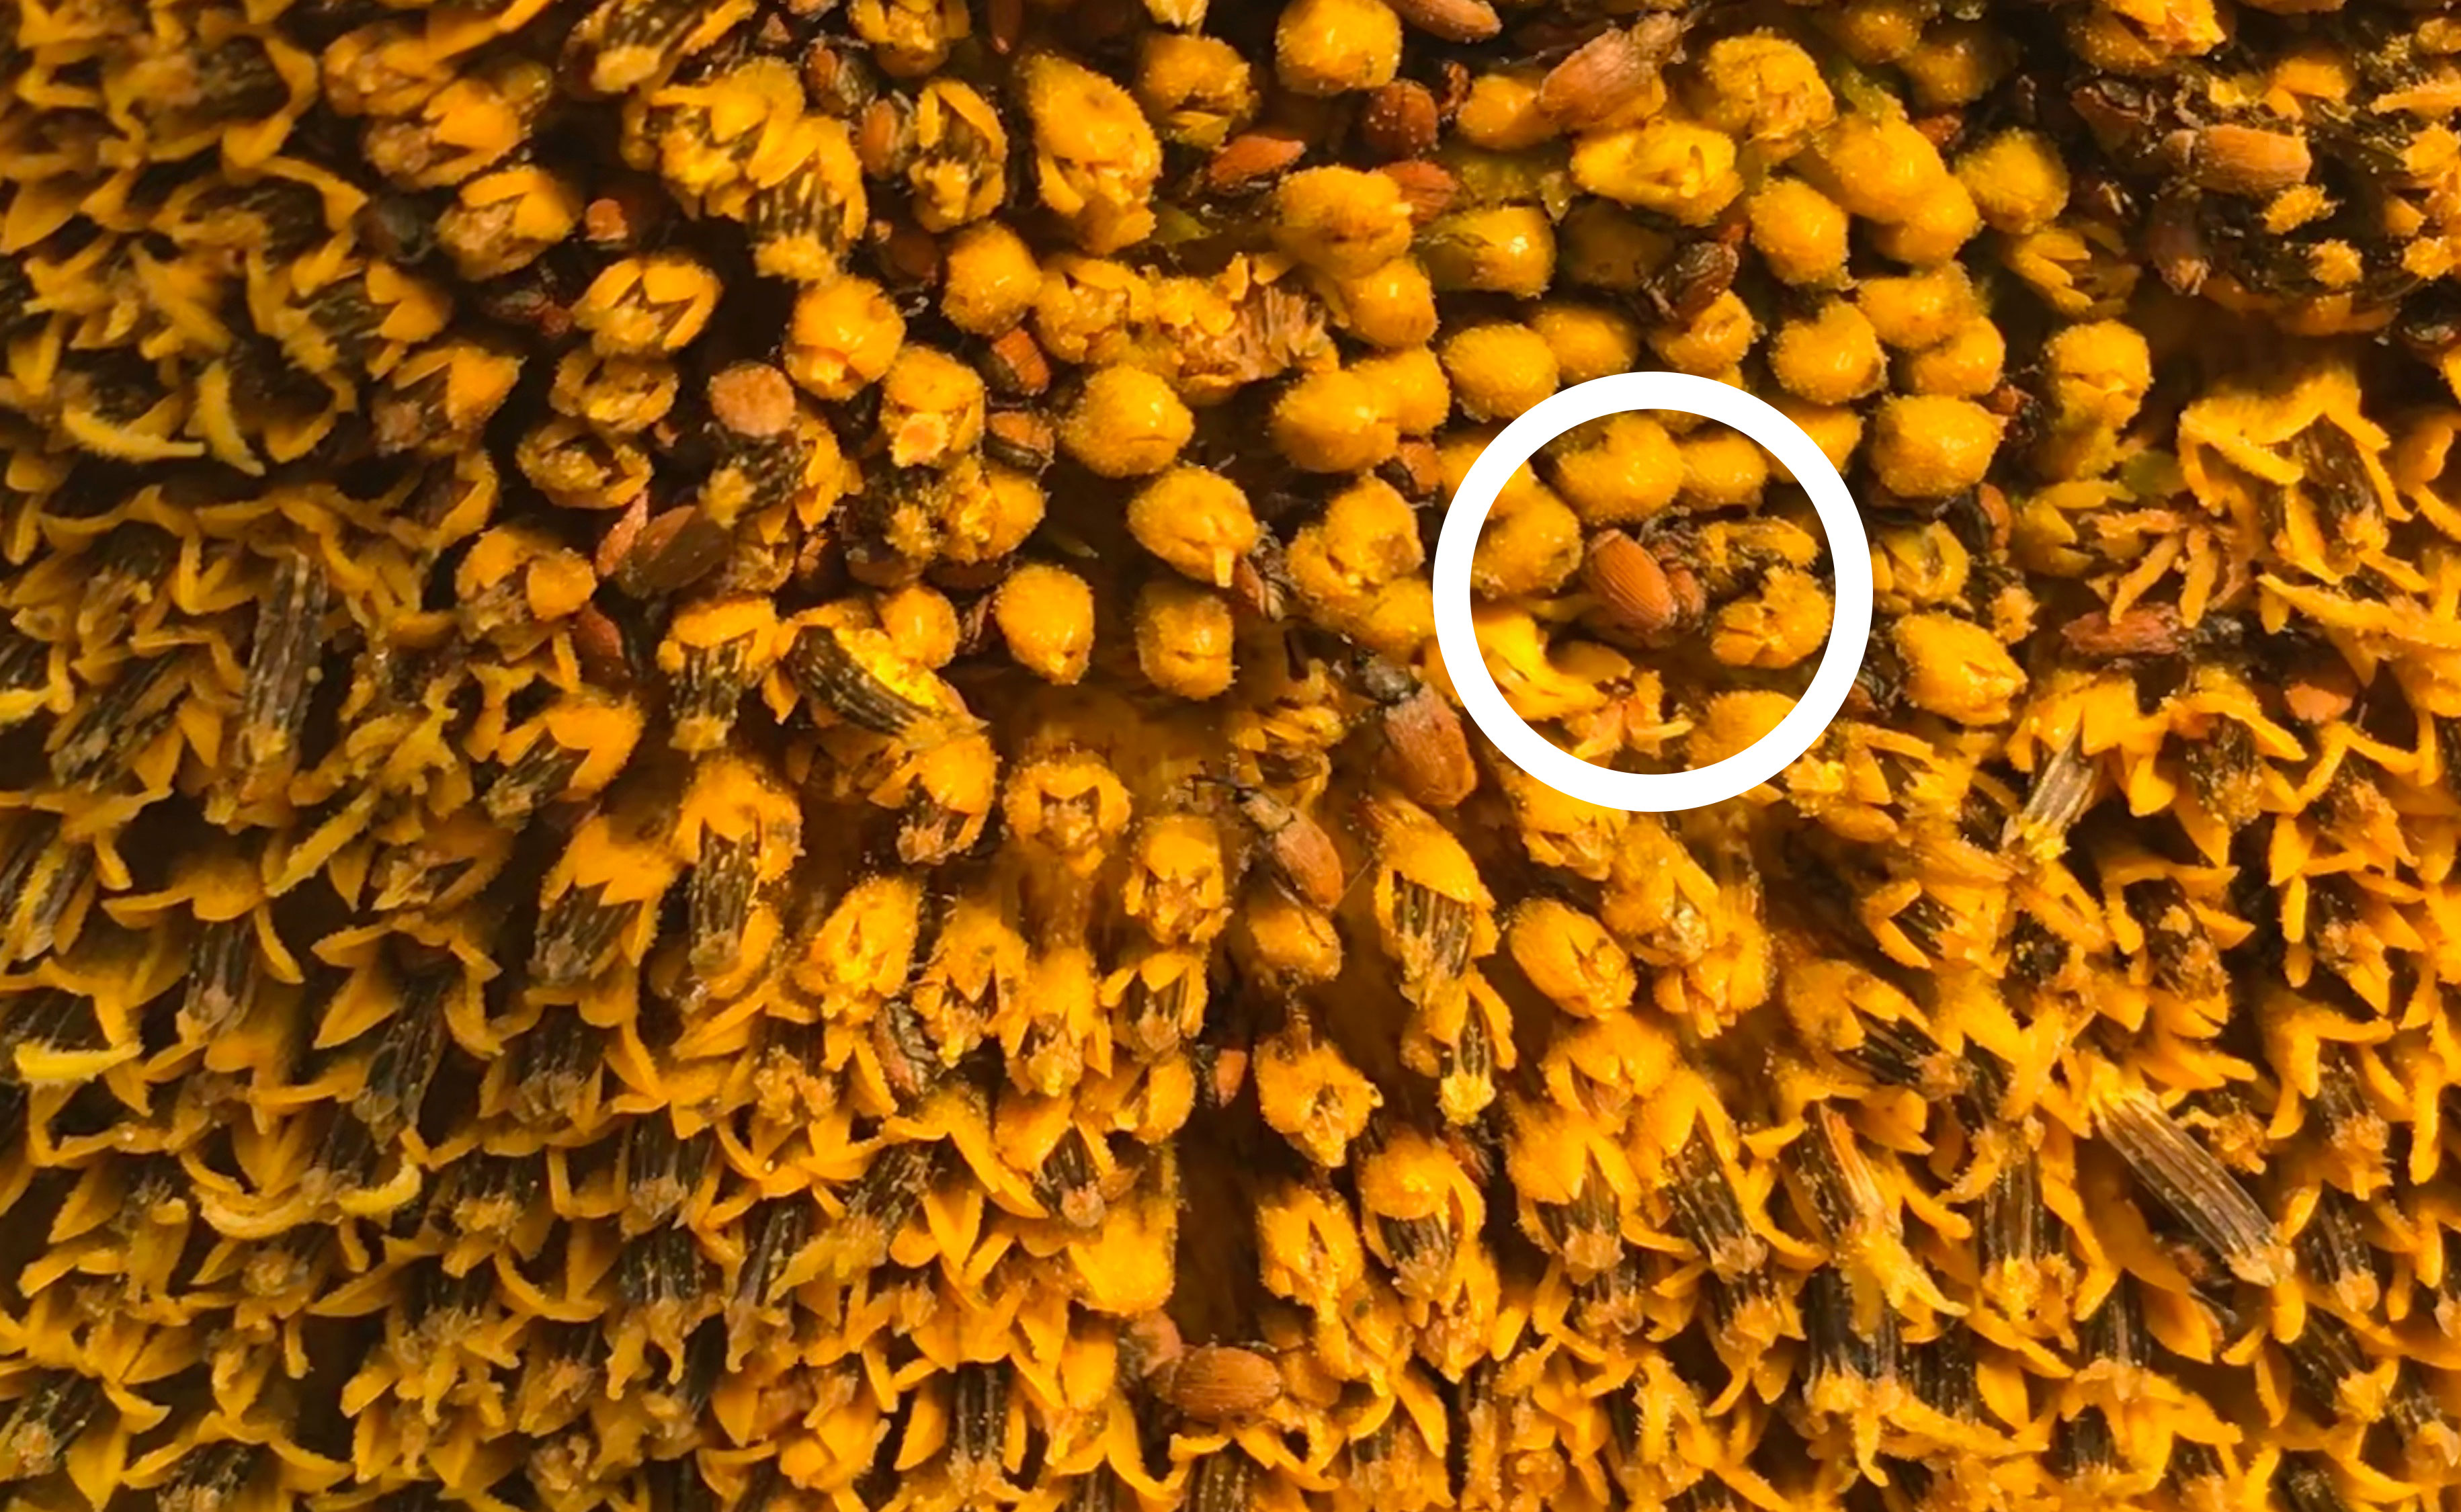 Several red-brown colored weevils crawling on the yellow florets of a sunflower. One is circled.